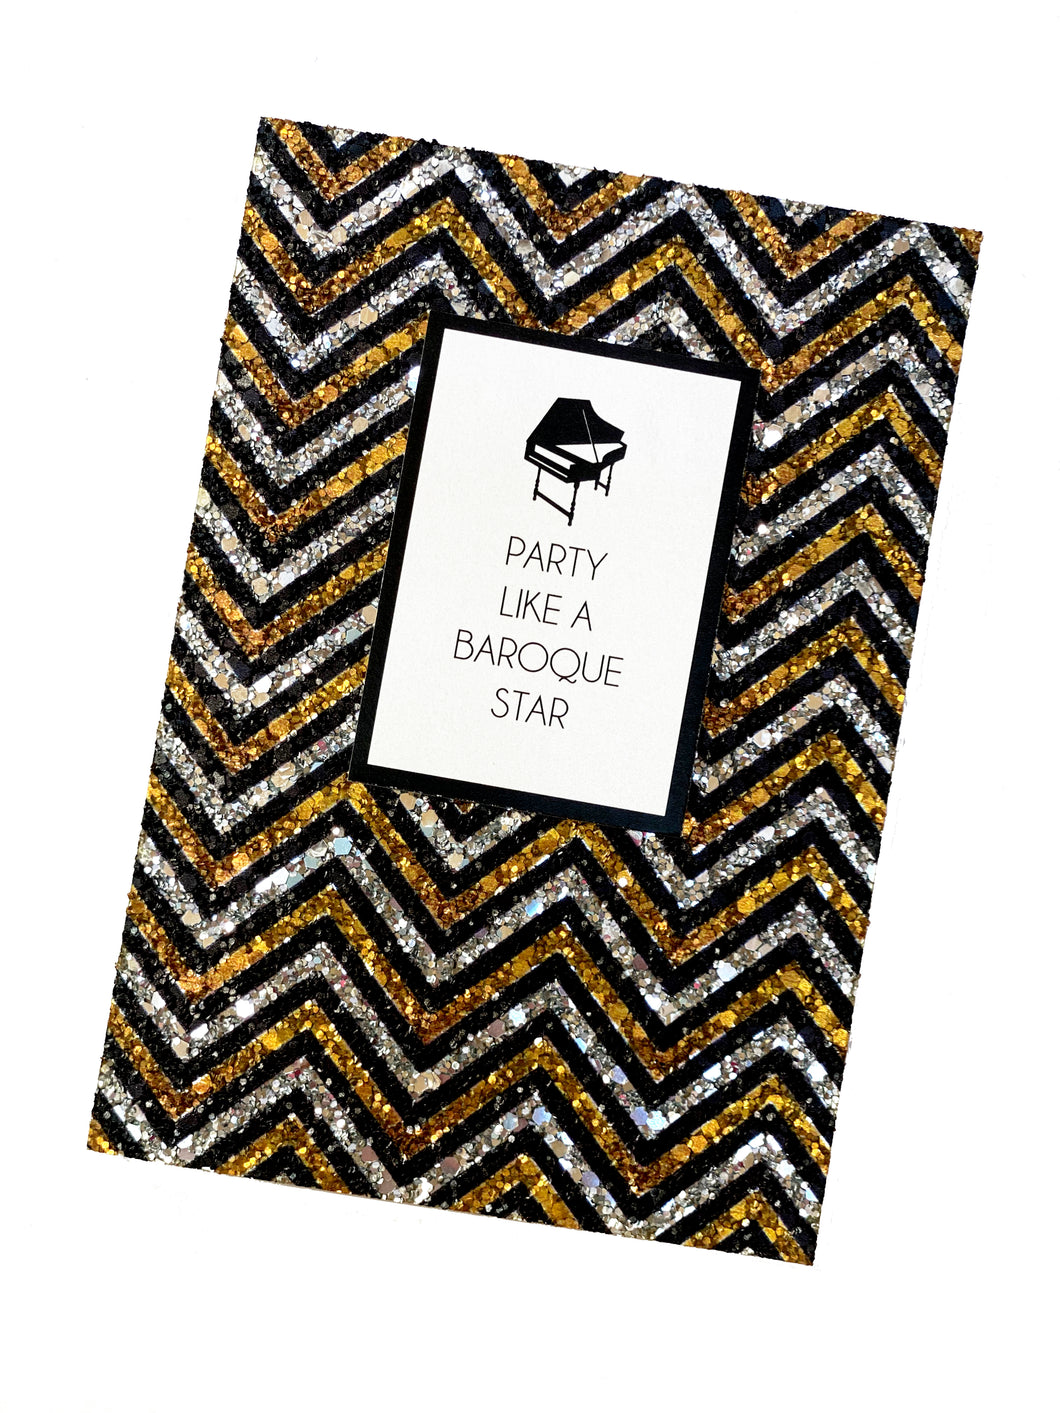 'Party like a baroque star'. Greetings Card with dynamic glitter fabric backdrop